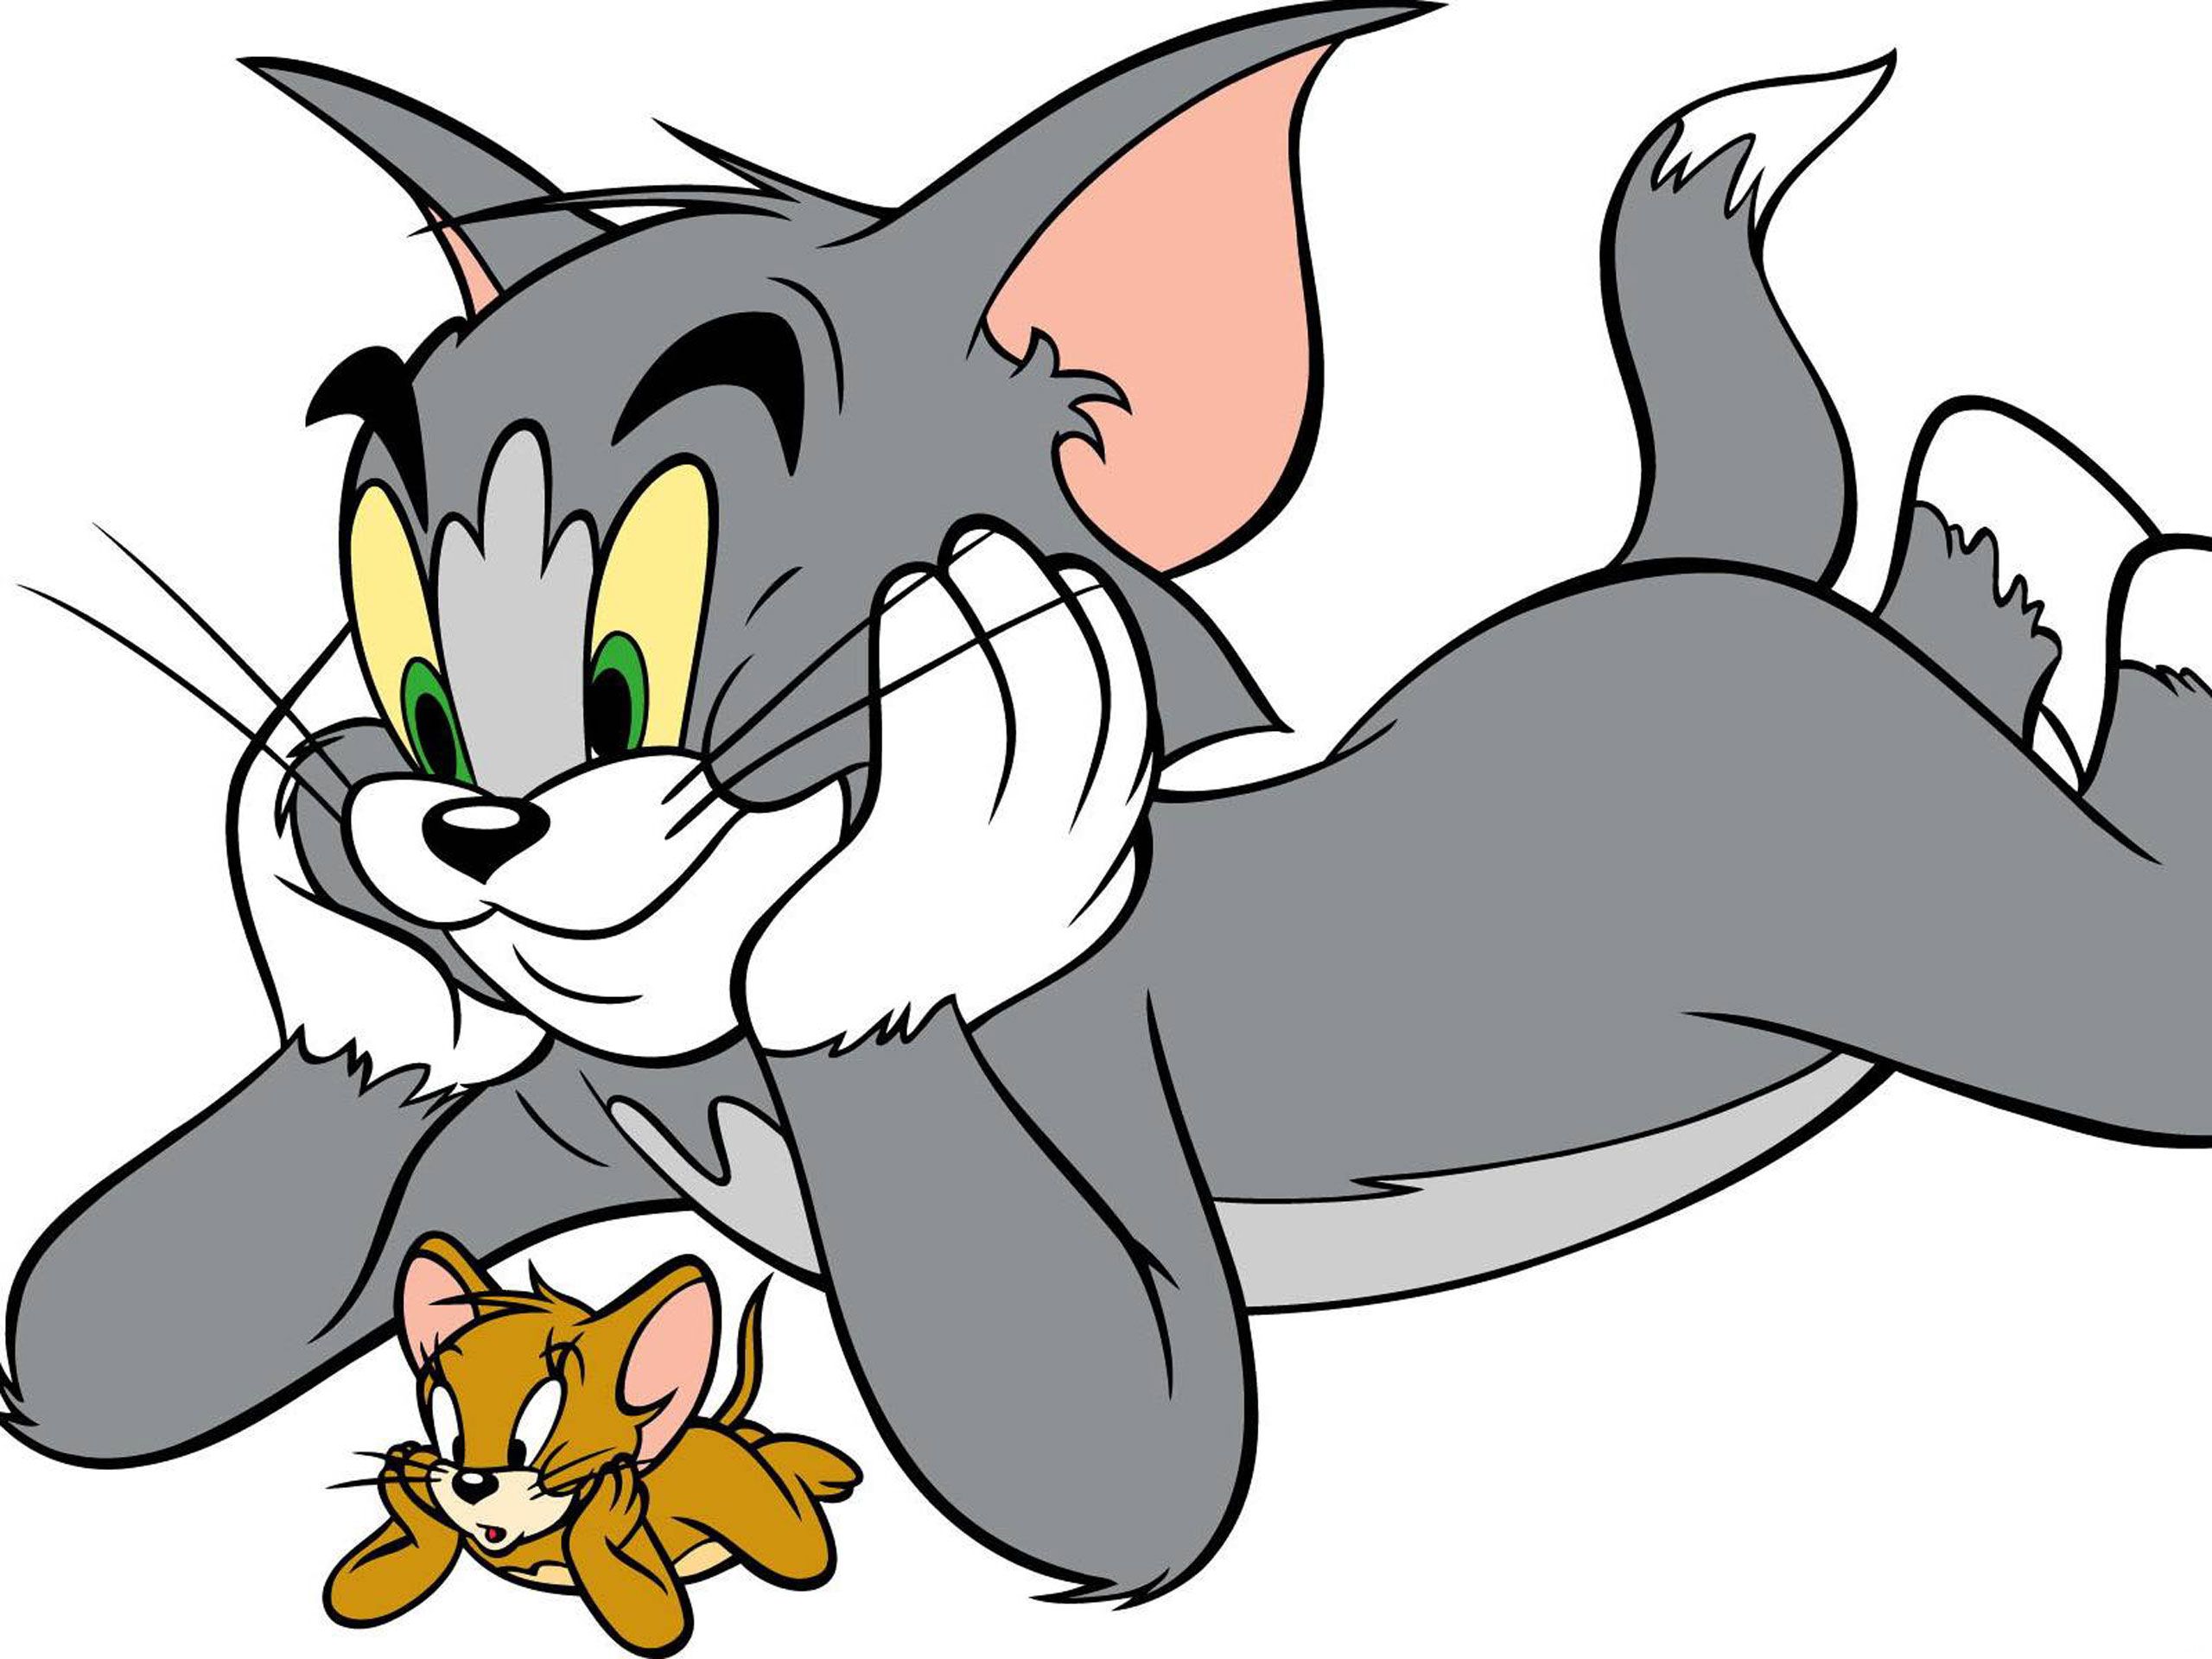 Tom And Jerry wallpaper, Cartoon, HQ Tom And Jerry pictureK Wallpaper 2019